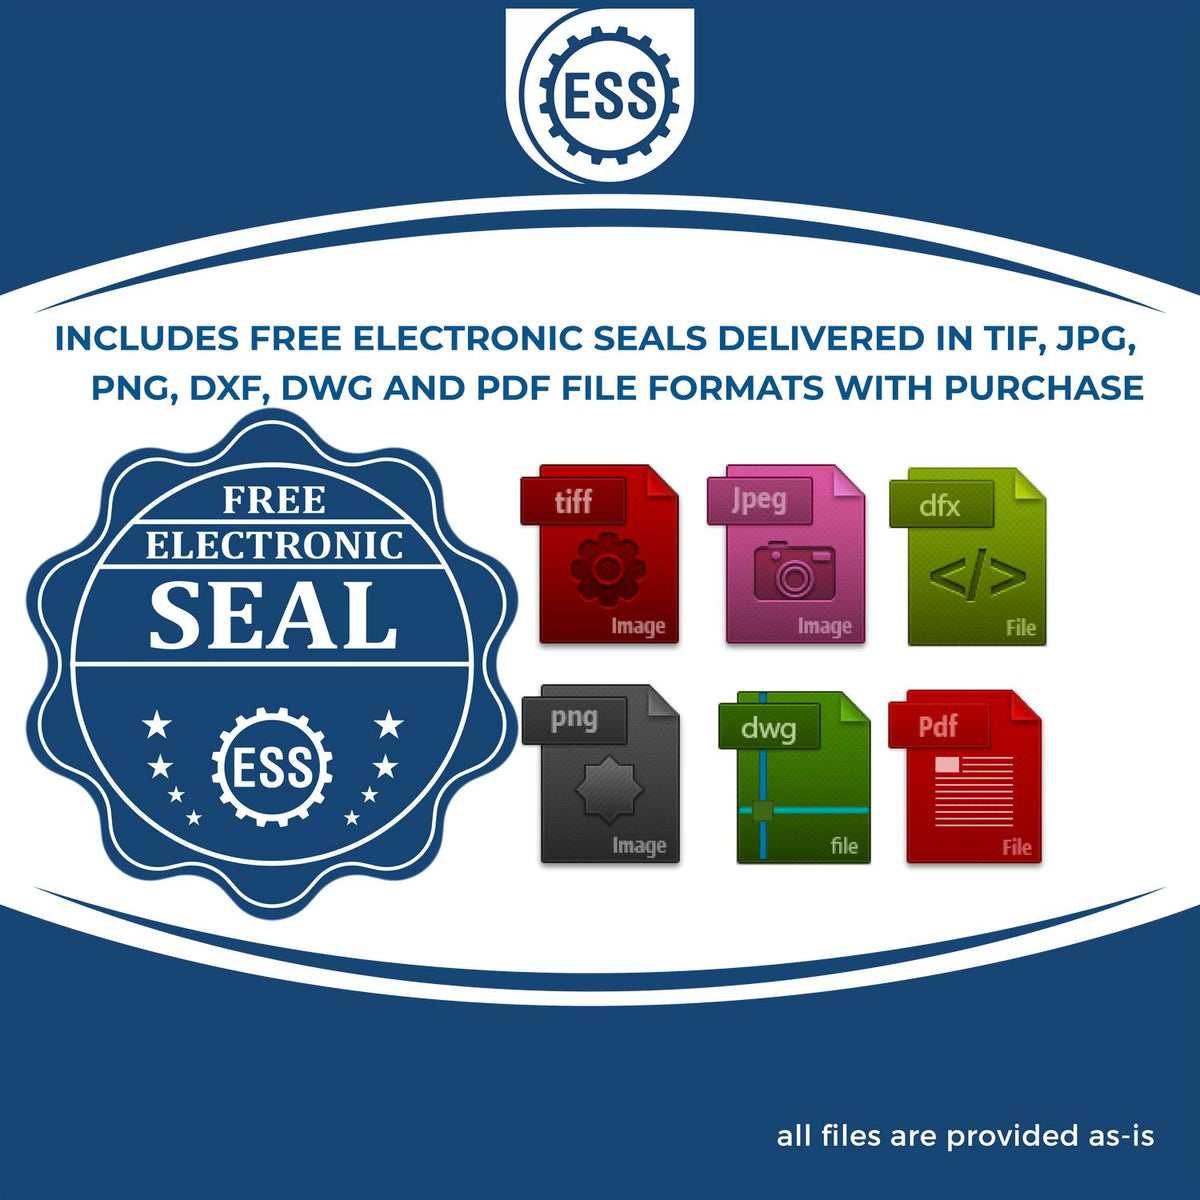 An infographic for the free electronic seal for the Heavy-Duty North Carolina Rectangular Notary Stamp illustrating the different file type icons such as DXF, DWG, TIF, JPG and PNG.